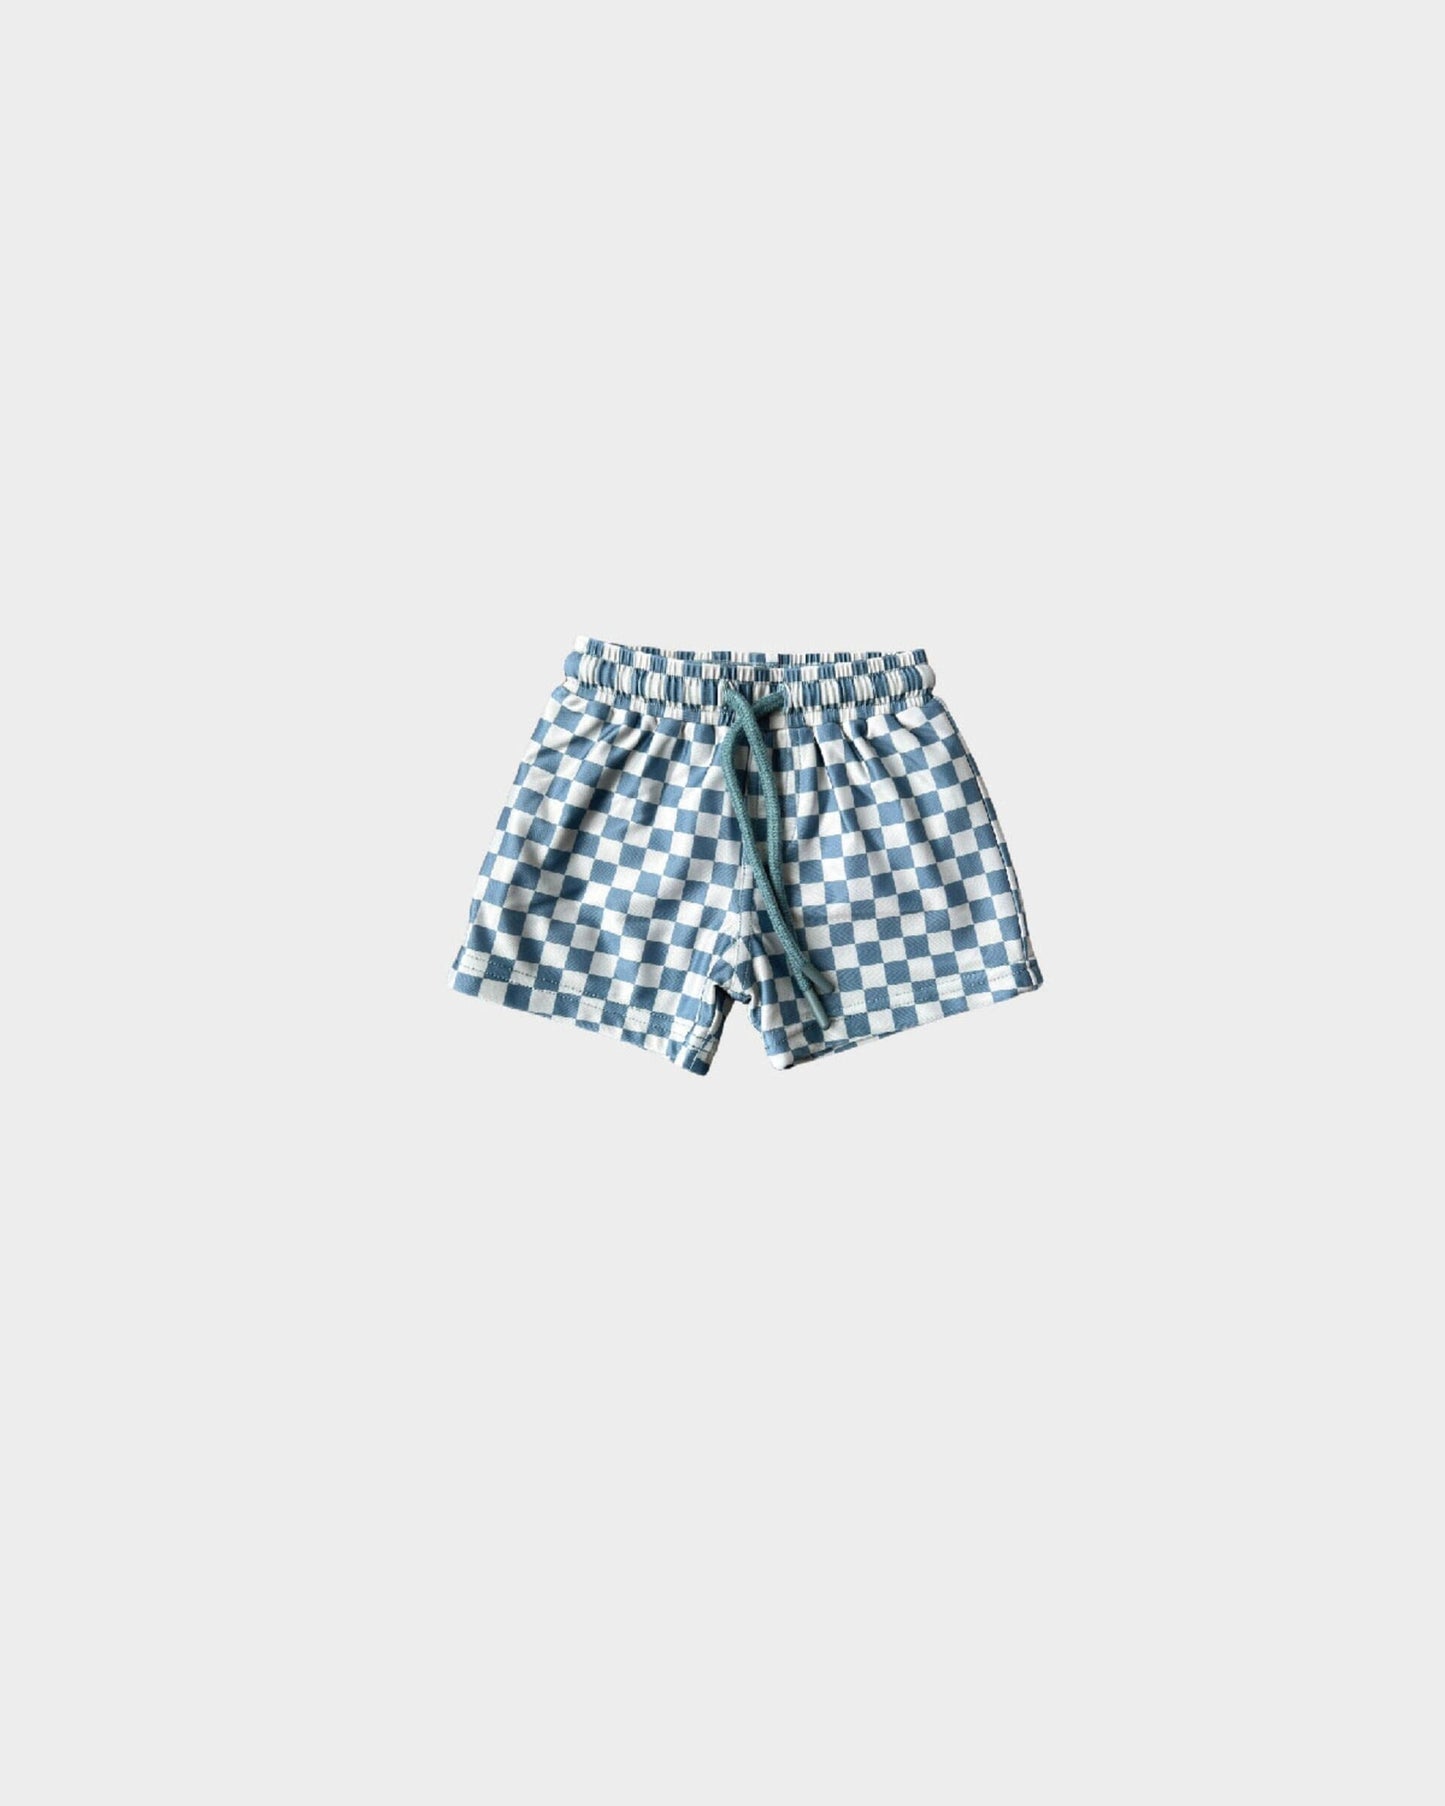 Blue Checkered Swim Trunks 140 BOYS APPAREL 2-8 Baby Sprouts 2T 